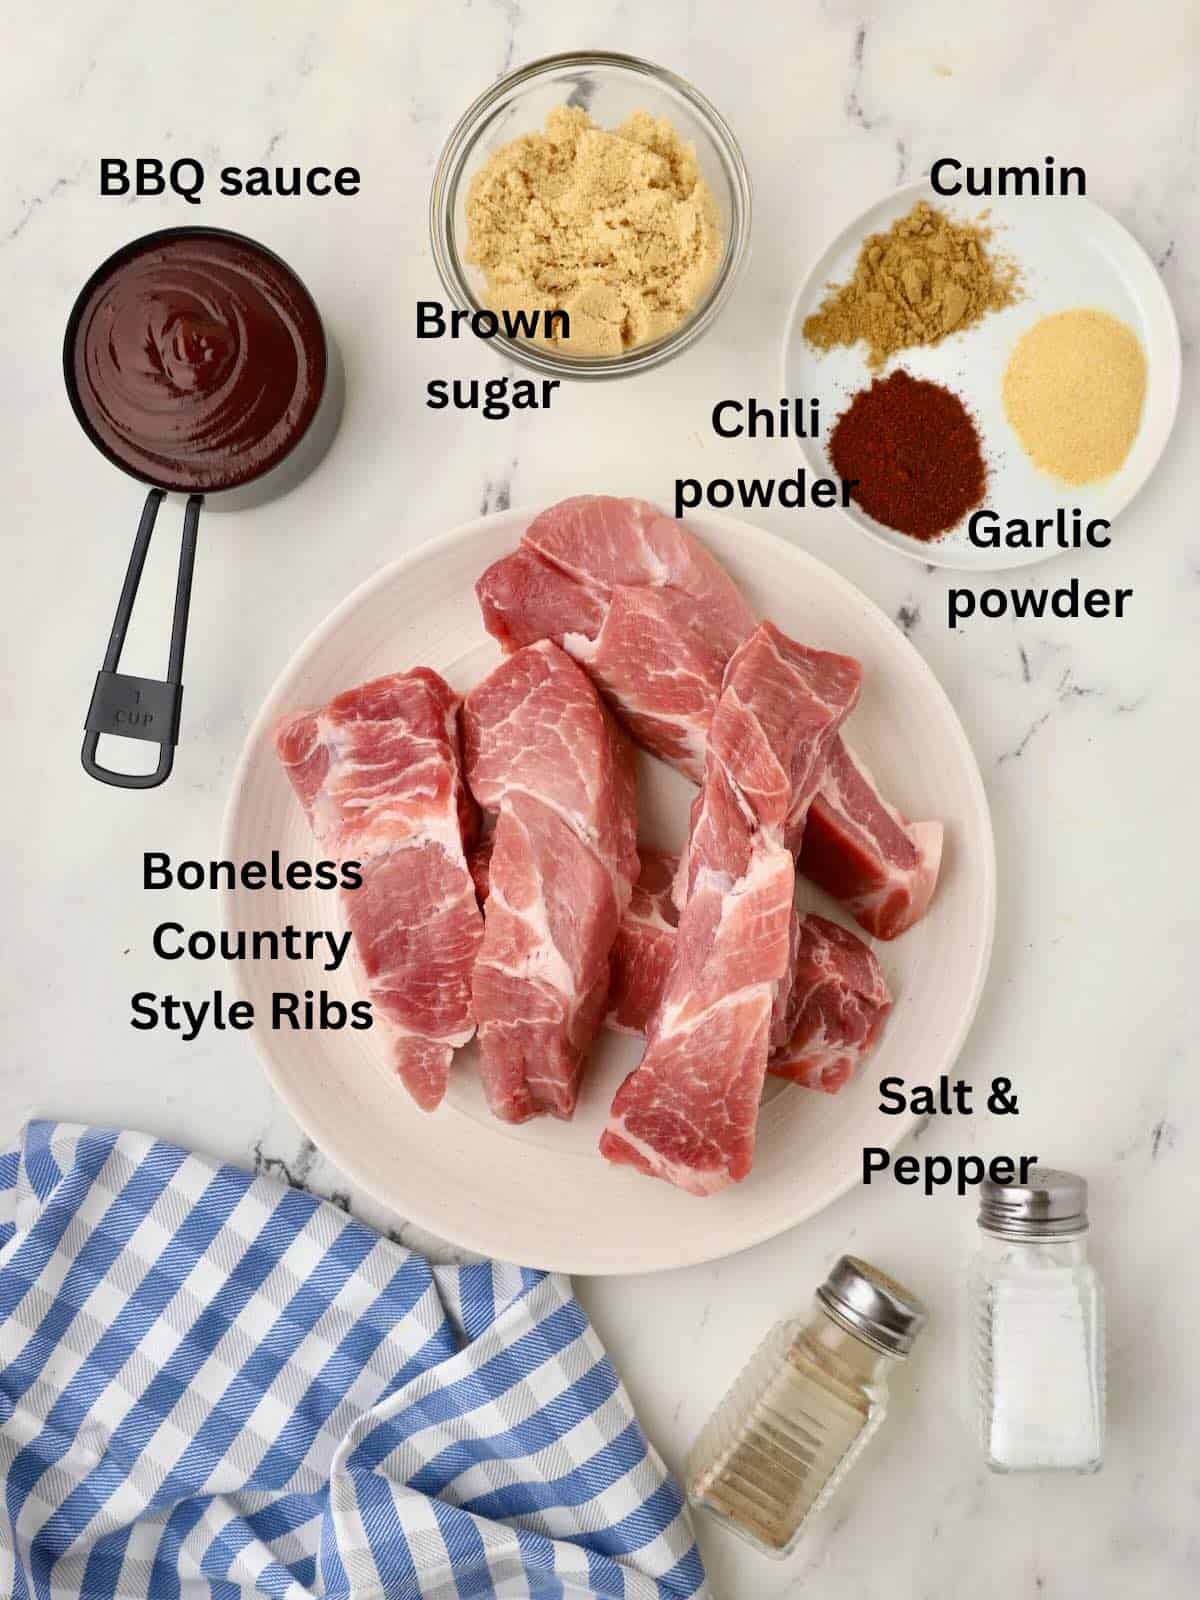 Ingredients to make oven baked ribs including boneless ribs, BBQ sauce, and ingredients for a dry rub. 